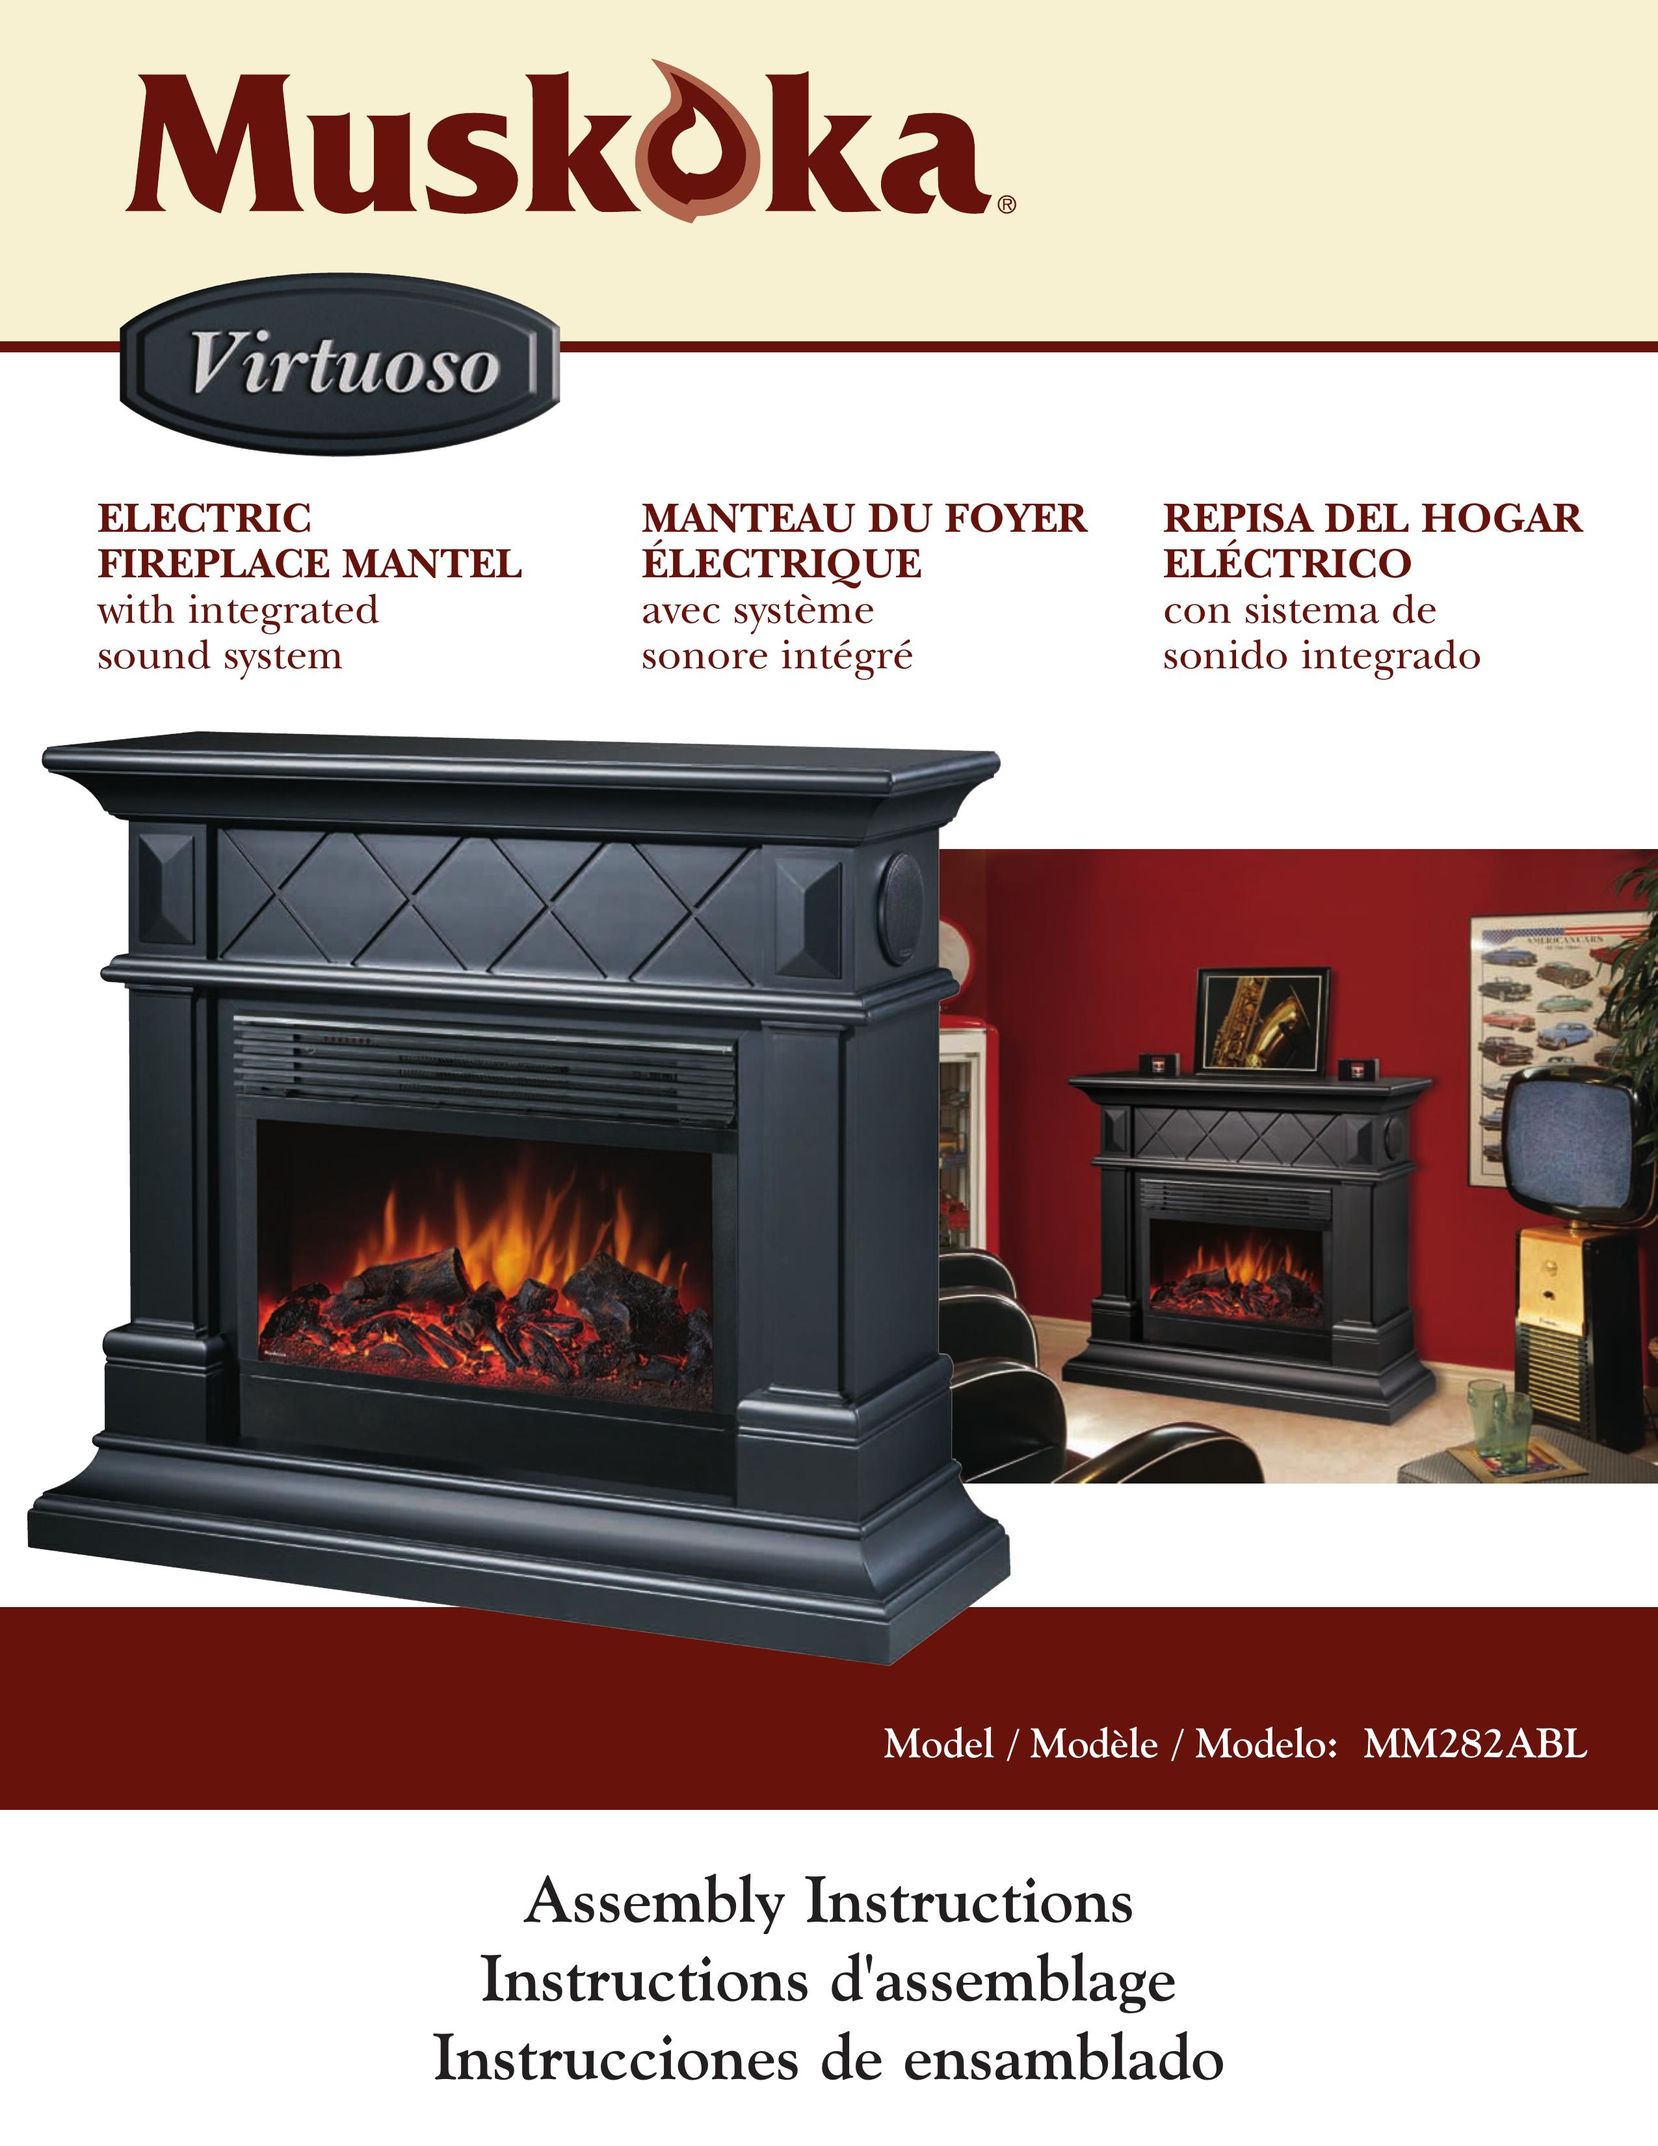 Greenway Home Products MM282ABL Indoor Fireplace User Manual